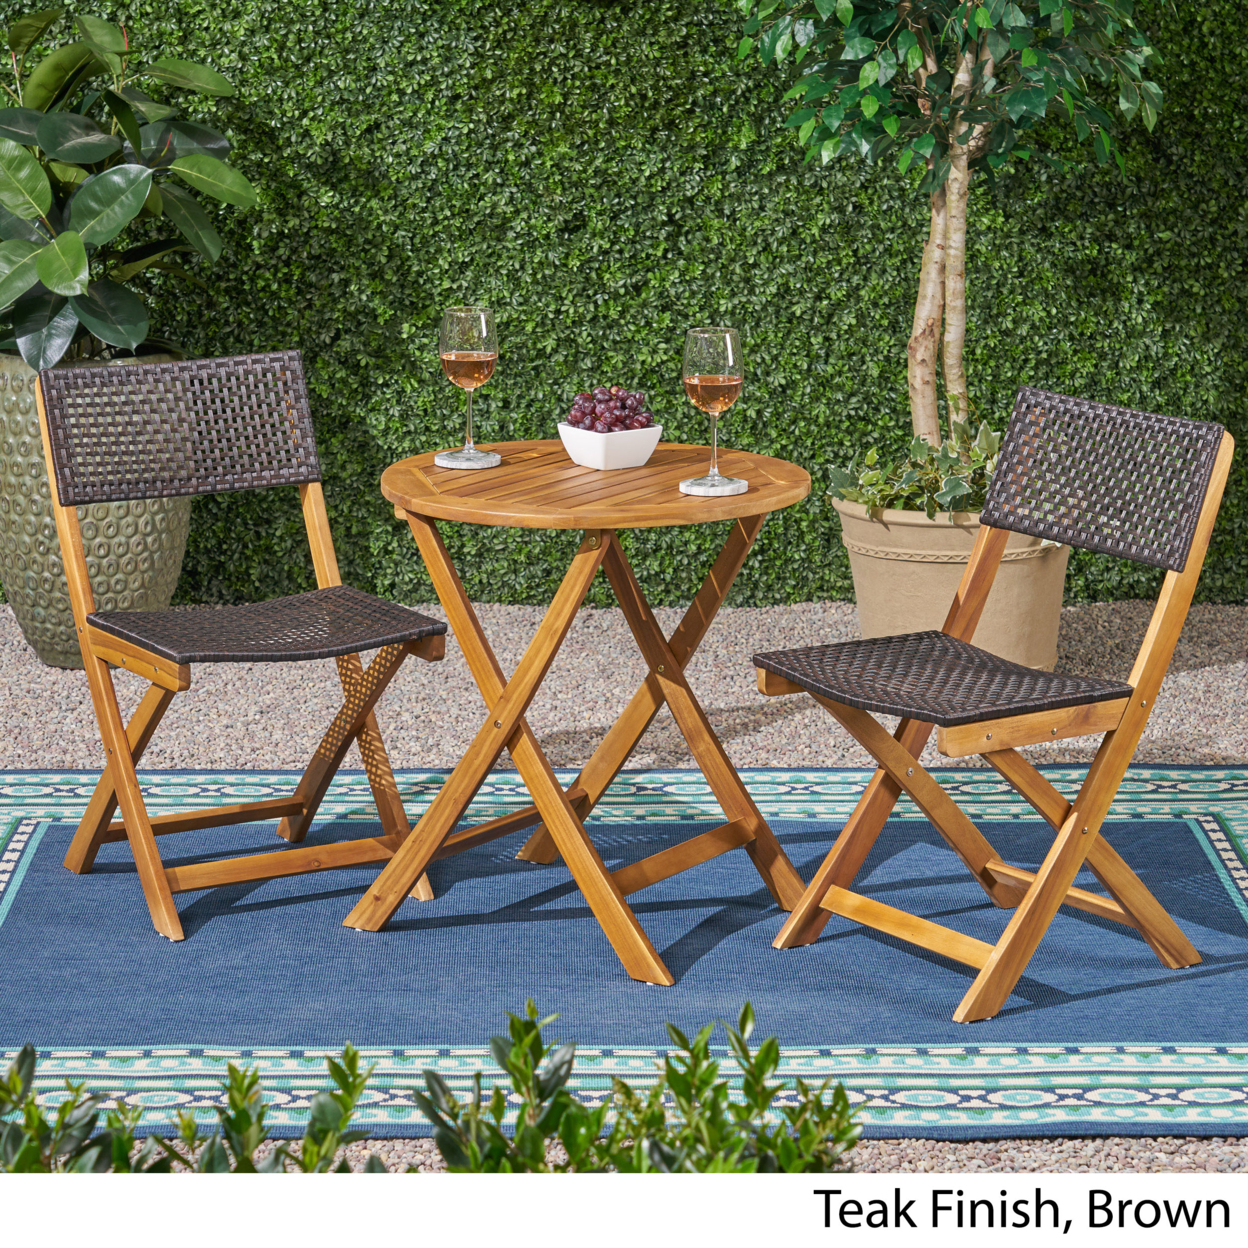 Ida Outdoor Acacia Wood Wicker Foldable Bistro Set With Chairs And Table - Dark Gray + Brown Wicker